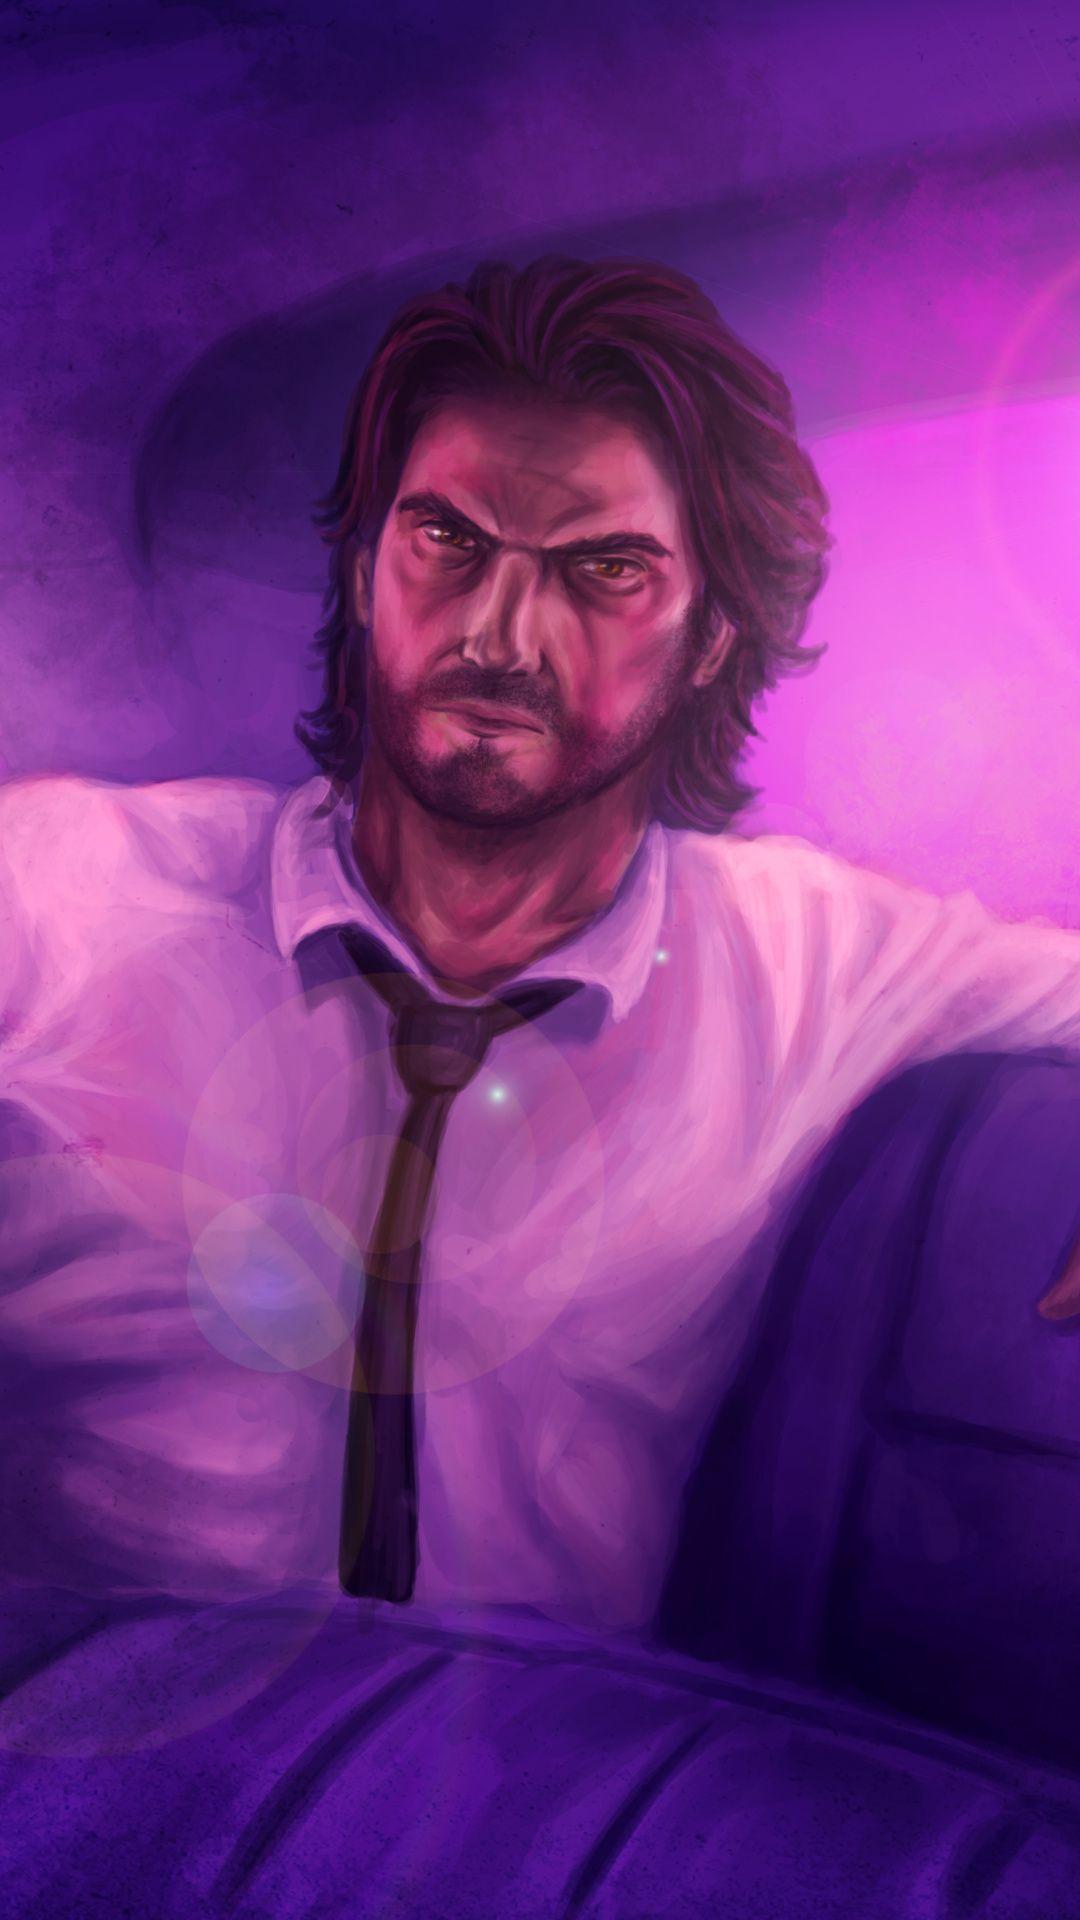 The Wolf Among Us for windows download free